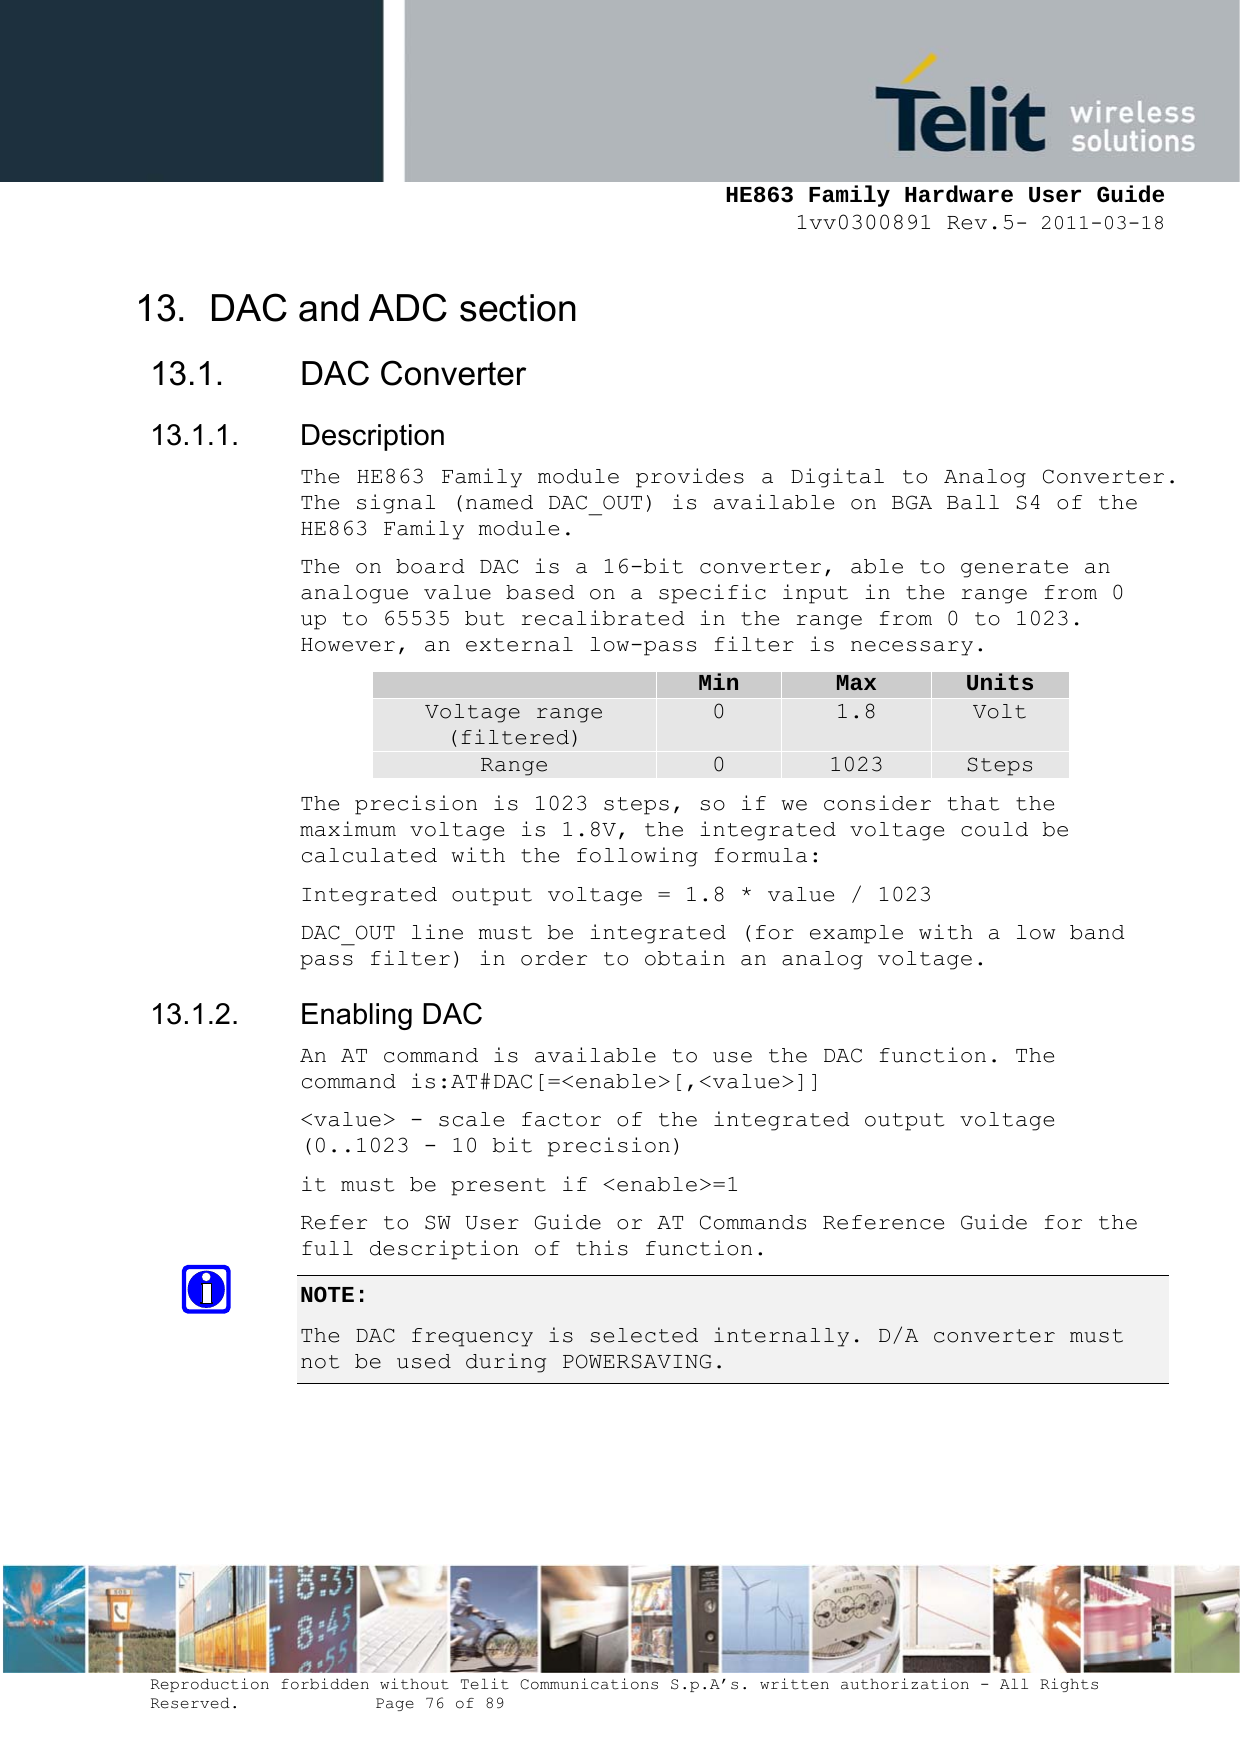     HE863 Family Hardware User Guide 1vv0300891 Rev.5- 2011-03-18    Reproduction forbidden without Telit Communications S.p.A’s. written authorization - All Rights Reserved.    Page 76 of 89  13.  DAC and ADC section 13.1. DAC Converter 13.1.1. Description The HE863 Family module provides a Digital to Analog Converter. The signal (named DAC_OUT) is available on BGA Ball S4 of the HE863 Family module. The on board DAC is a 16-bit converter, able to generate an analogue value based on a specific input in the range from 0 up to 65535 but recalibrated in the range from 0 to 1023. However, an external low-pass filter is necessary.  Min  Max  Units Voltage range (filtered) 0  1.8  Volt Range  0  1023  Steps The precision is 1023 steps, so if we consider that the maximum voltage is 1.8V, the integrated voltage could be calculated with the following formula: Integrated output voltage = 1.8 * value / 1023 DAC_OUT line must be integrated (for example with a low band pass filter) in order to obtain an analog voltage. 13.1.2. Enabling DAC An AT command is available to use the DAC function. The command is:AT#DAC[=&lt;enable&gt;[,&lt;value&gt;]] &lt;value&gt; - scale factor of the integrated output voltage (0..1023 - 10 bit precision) it must be present if &lt;enable&gt;=1 Refer to SW User Guide or AT Commands Reference Guide for the full description of this function. NOTE:  The DAC frequency is selected internally. D/A converter must not be used during POWERSAVING.  